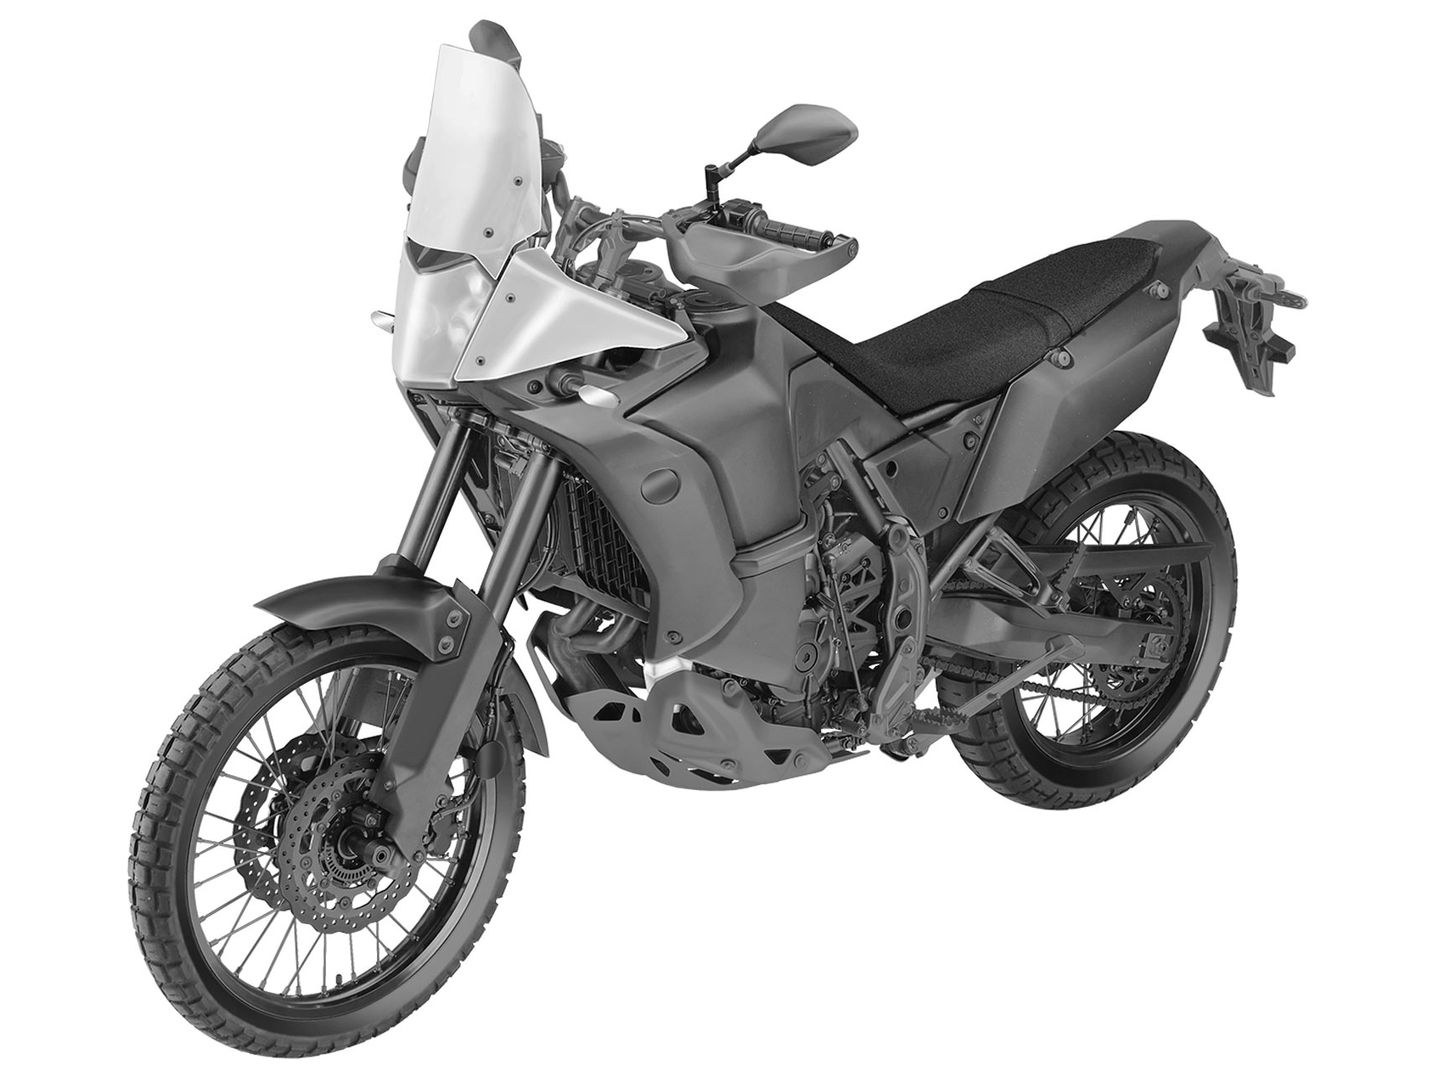 Patents show rally-raid styled Tenere 700 is coming - Adventure Rider